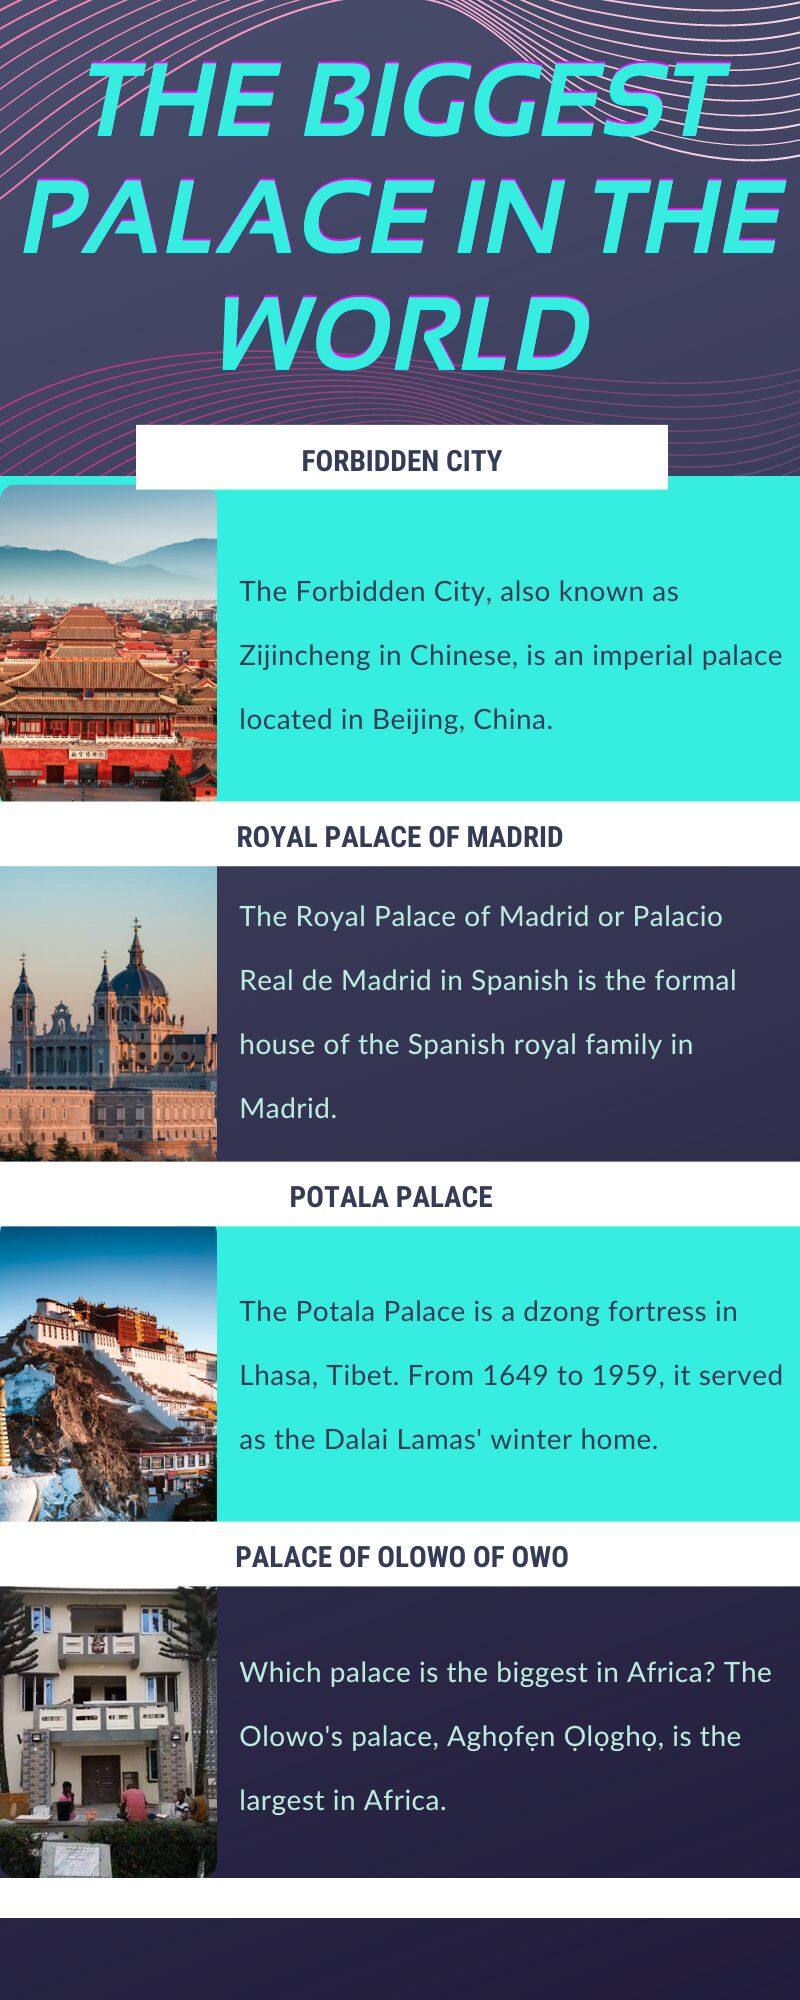 What is the biggest palace in the world